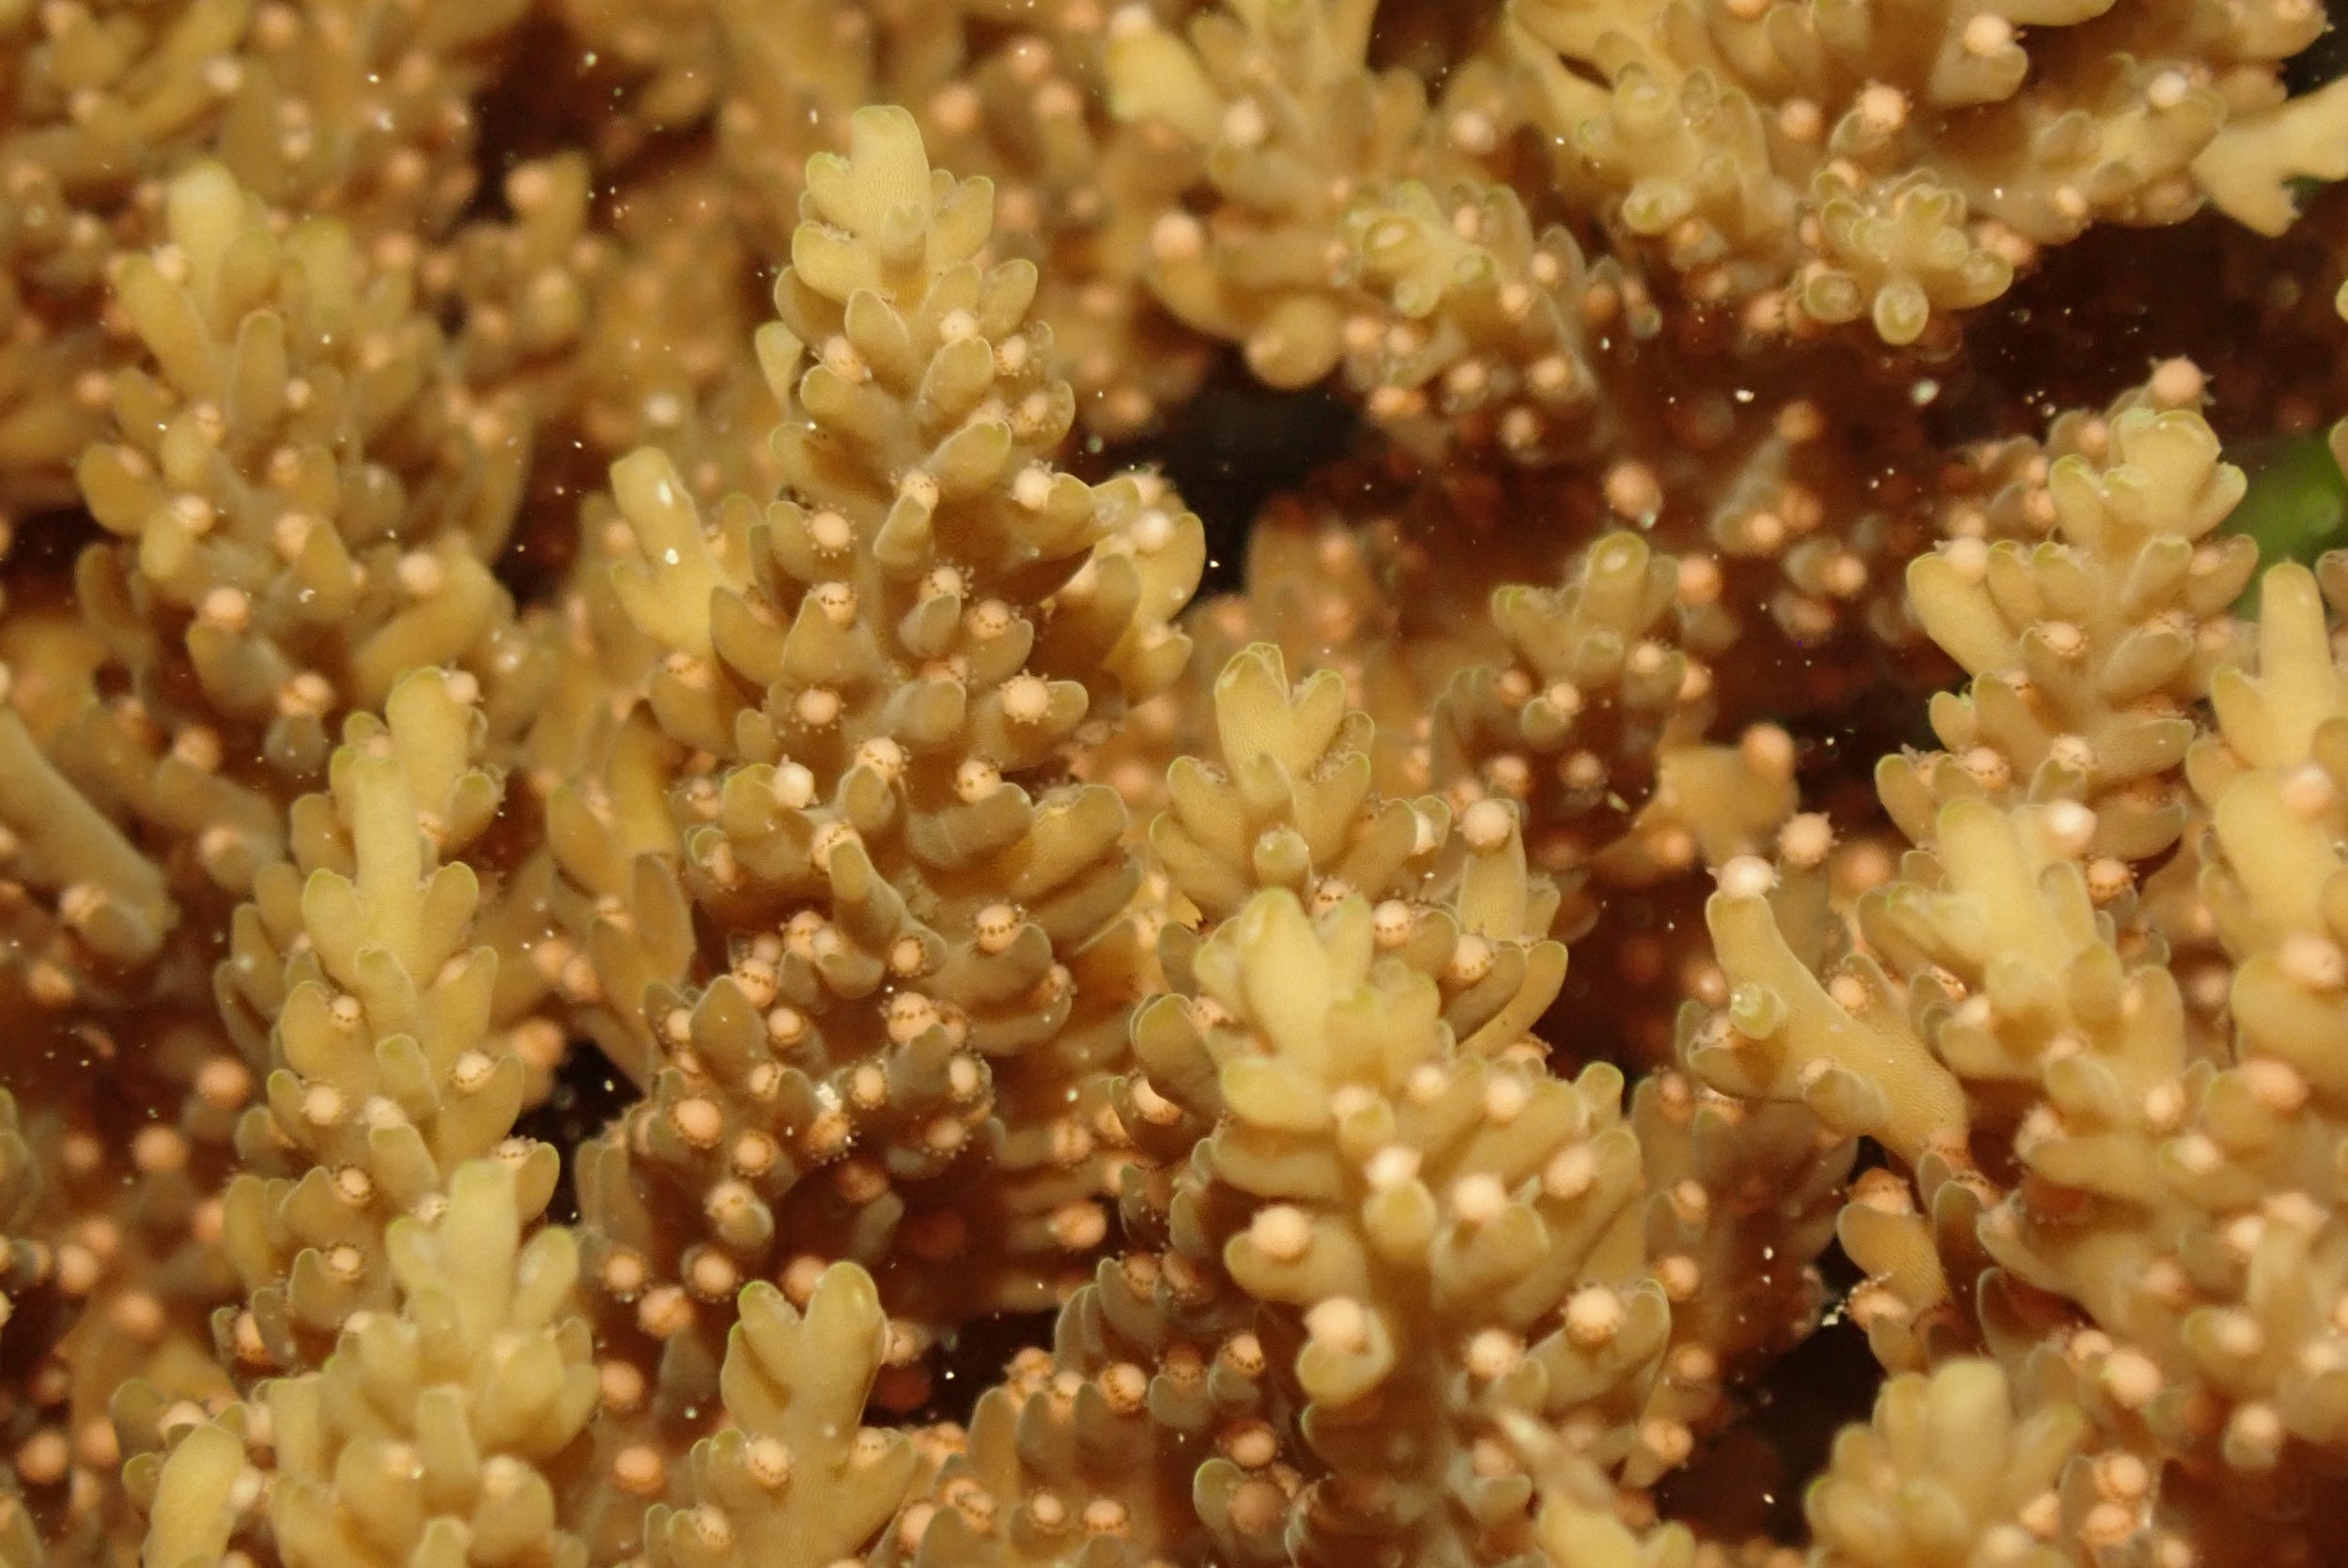 yellow coral spawning up close little protuberances releasing small yellow balls